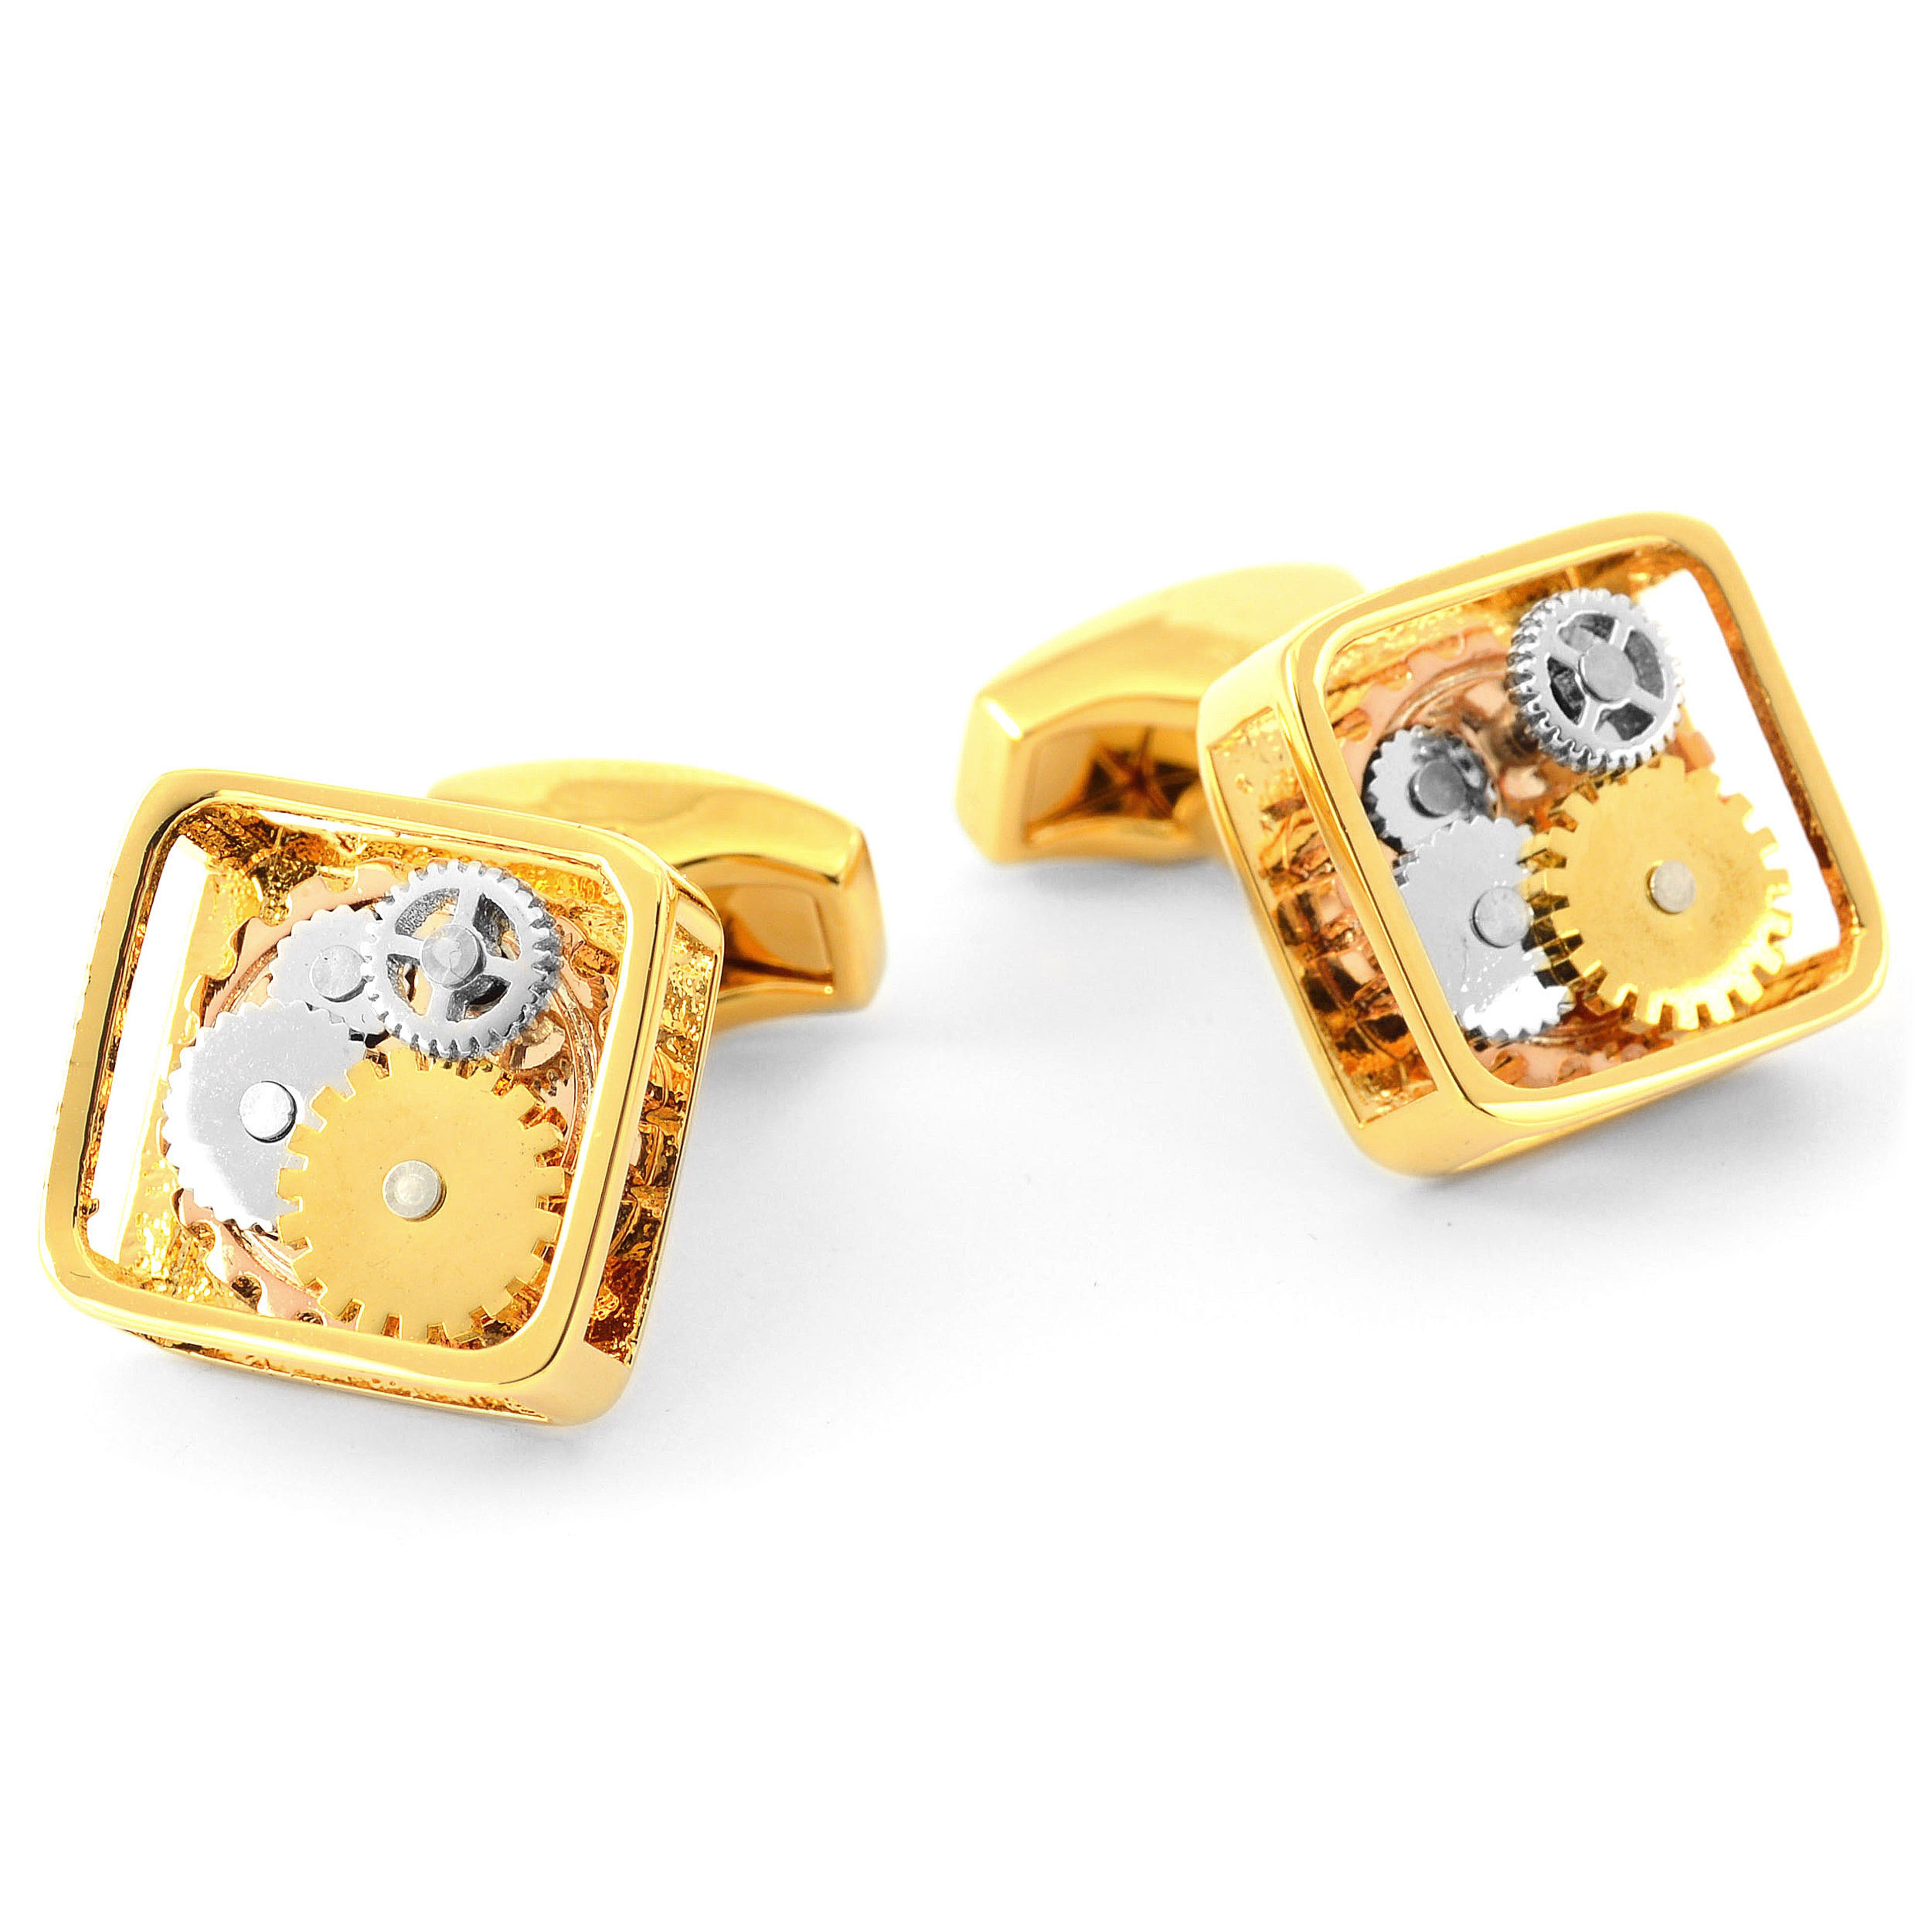 Square Gold-Tone Watch Movement Stainless Steel Cufflinks